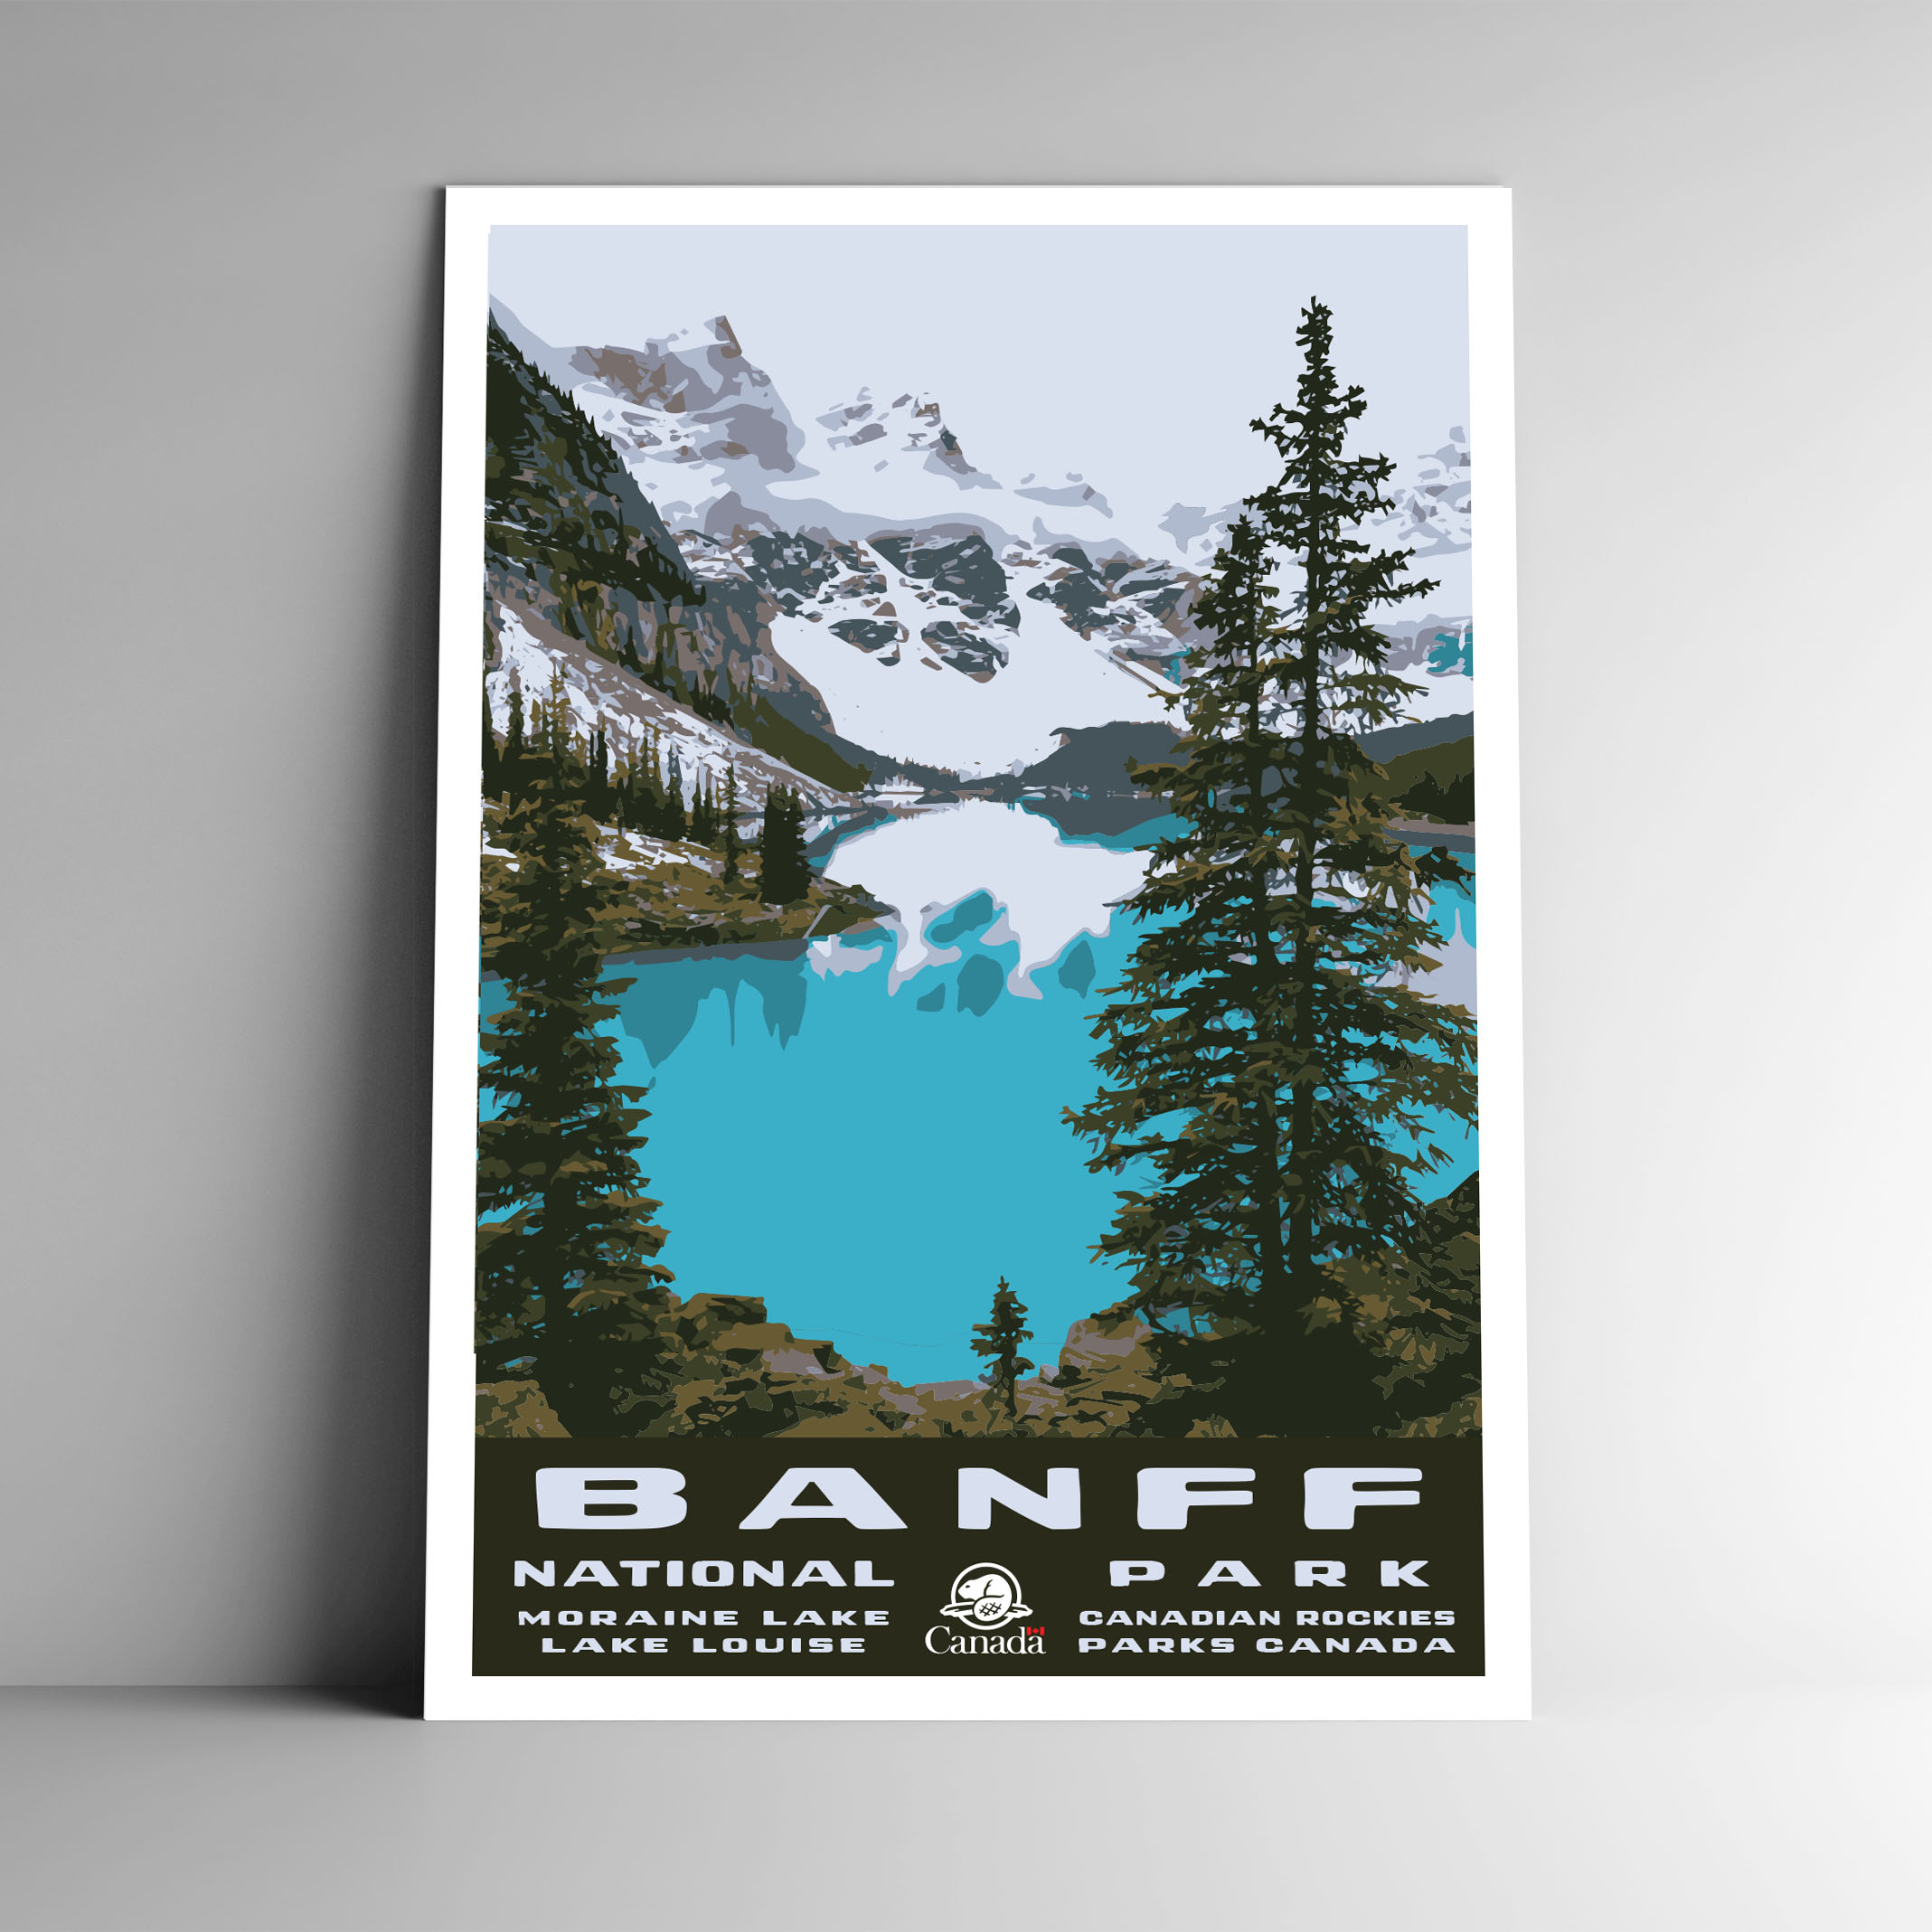 Home & Living :: Wall Decor :: Wall Art :: Banff National Park  Vintage-Style Travel Poster / Postcard - 8x10 - 12x18 - 18x24 - 24x36 / 4x6  WPA-Style Alberta Parks Canada Parcs Canada